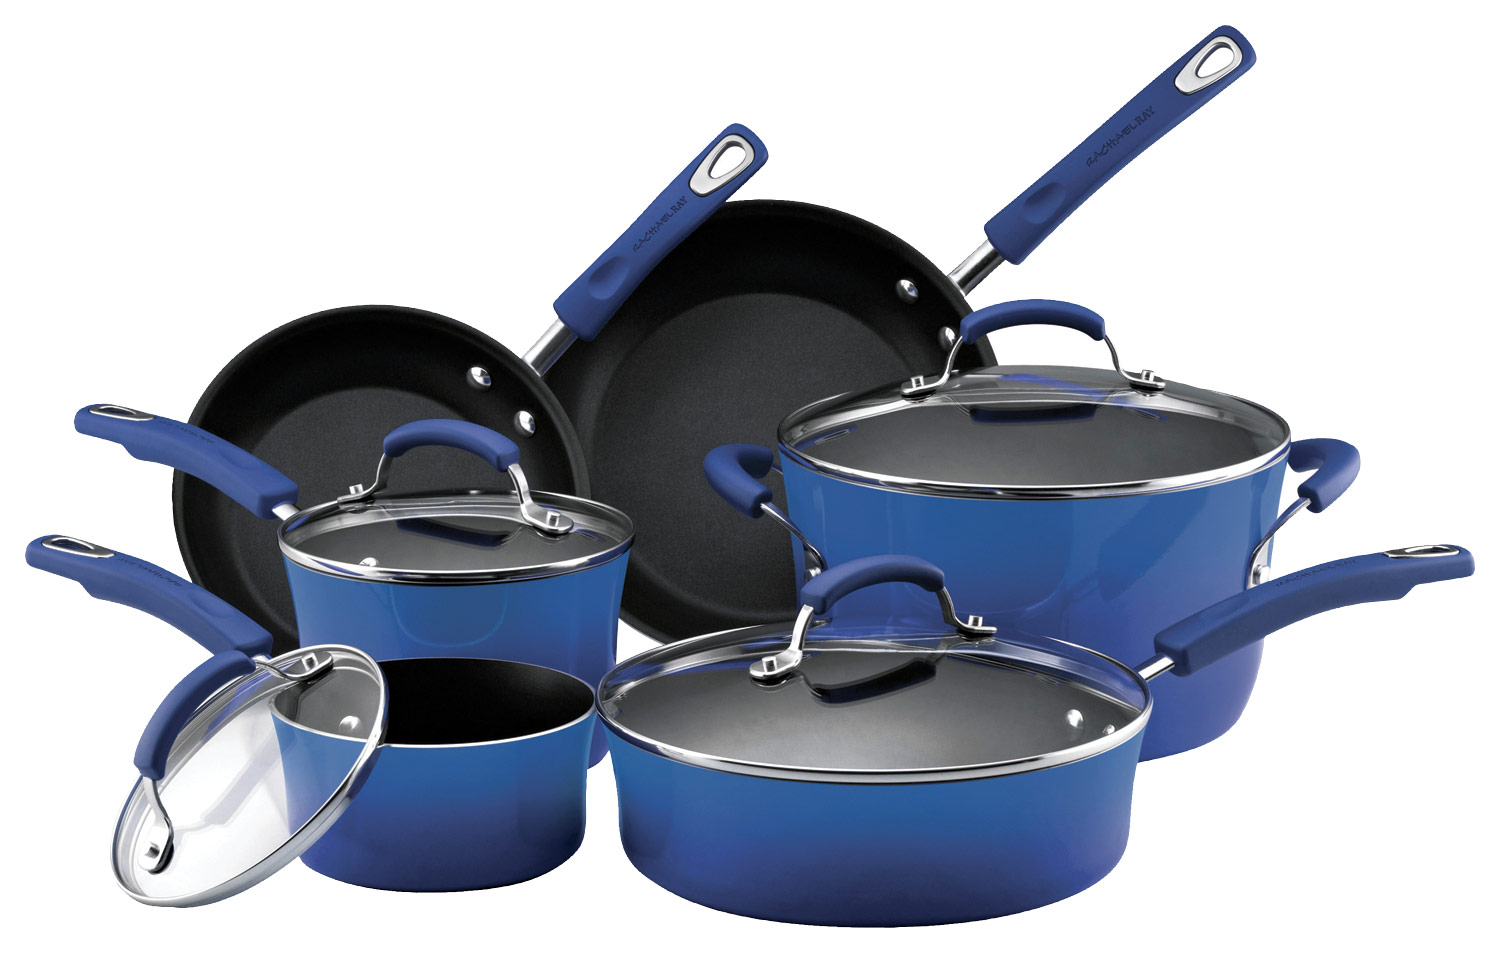 Colored Cookware Sets - Best Buy